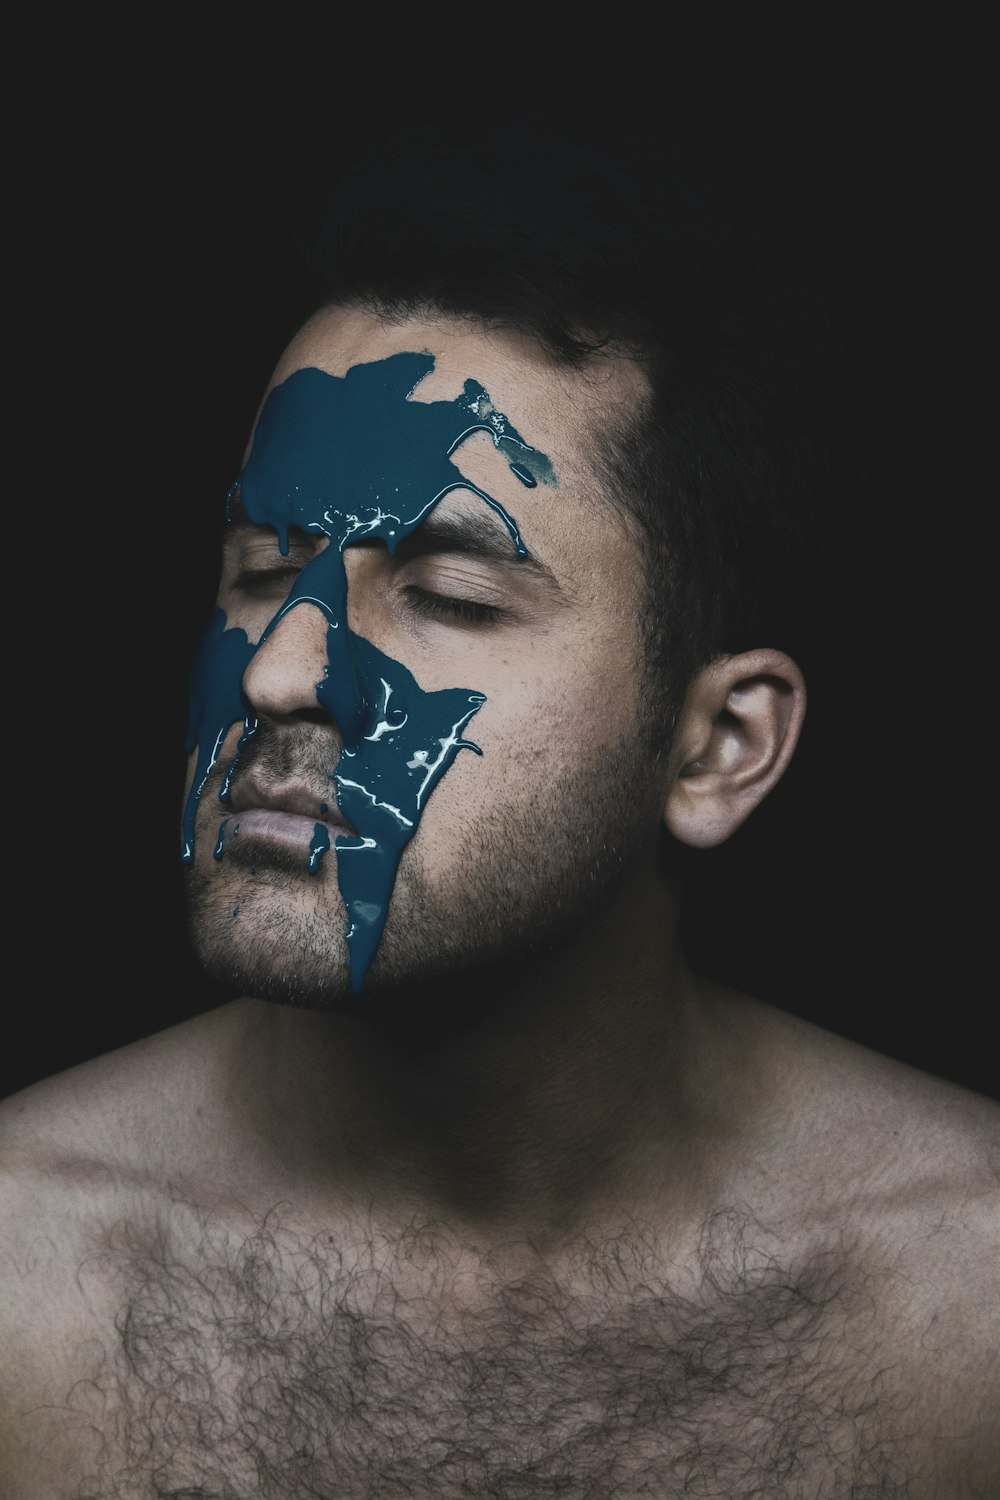 Man with blue and white face paint photo – Free Portraitstyle